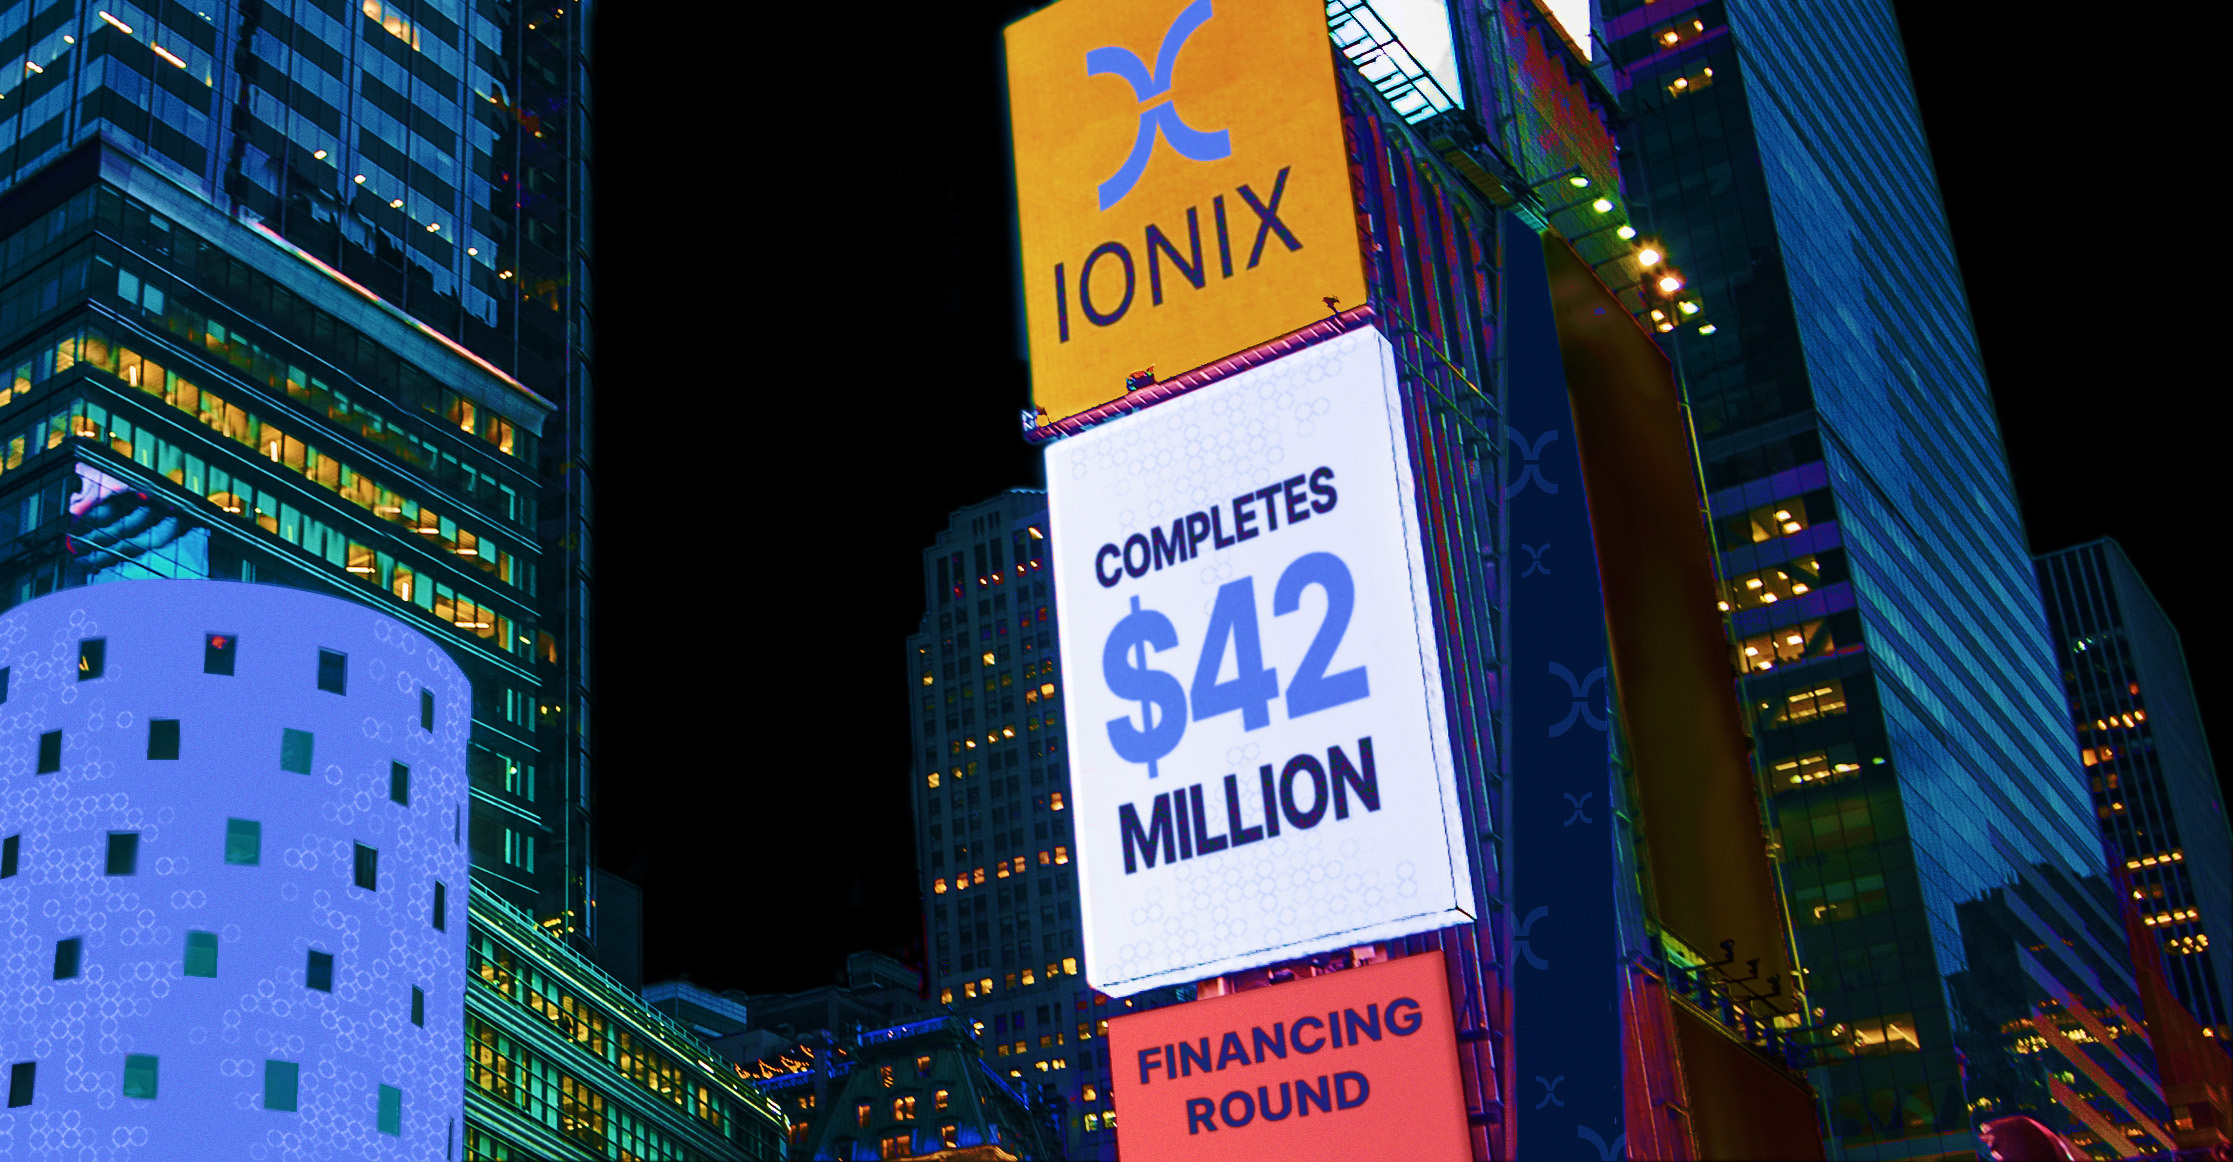 IONIX completes $42M financing round